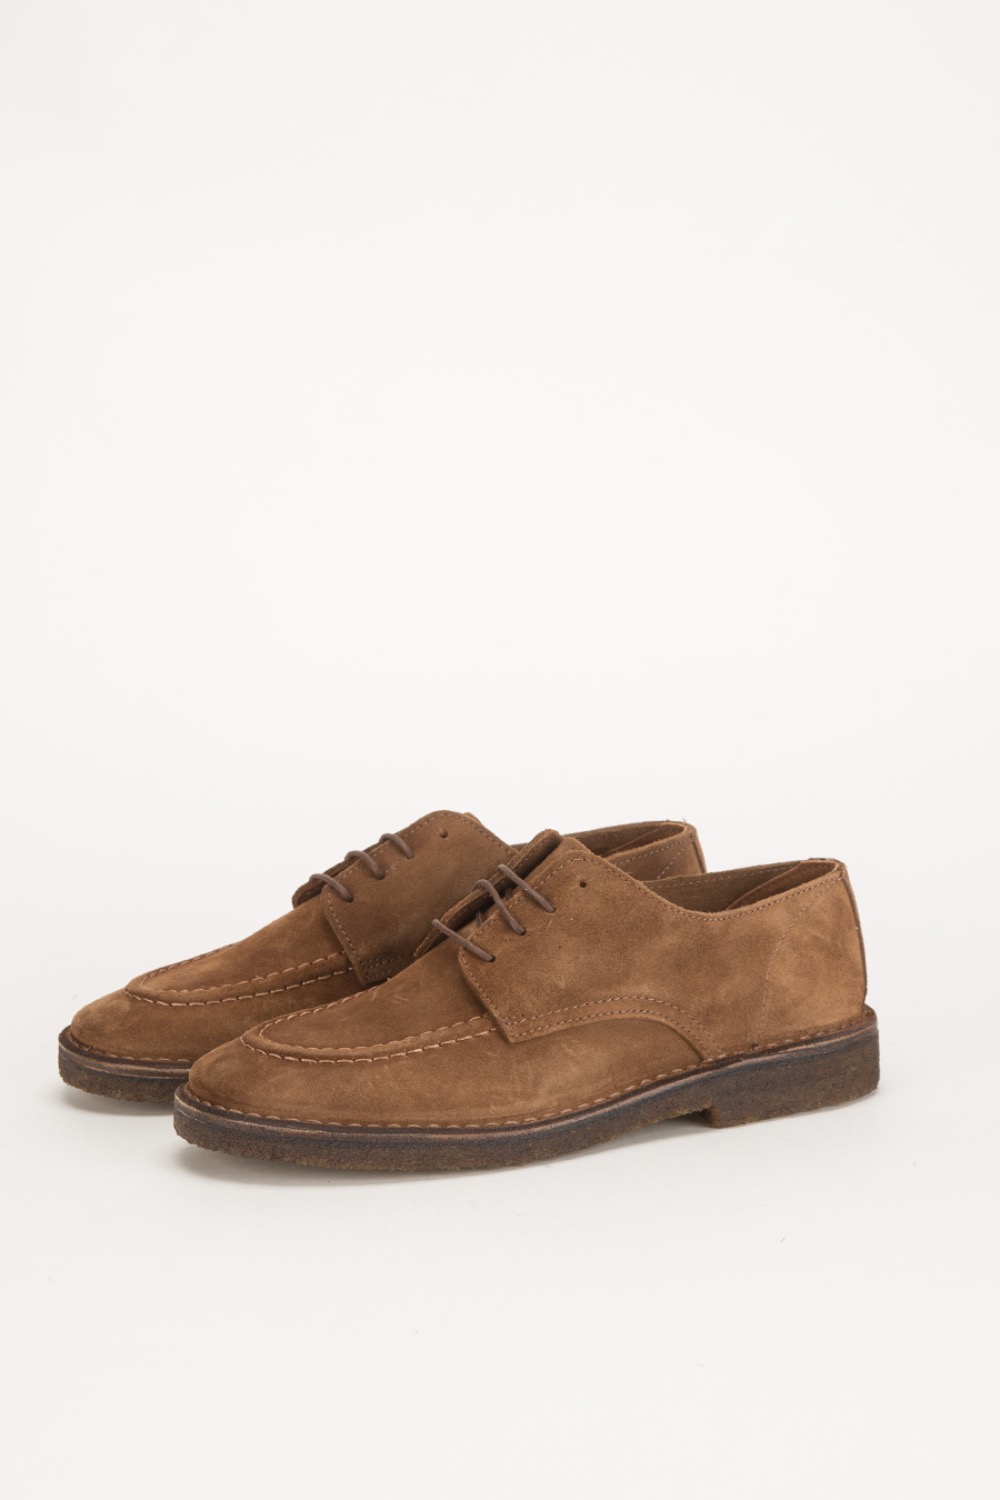 (CARRY OVER)CHARD MOC-TOE DERBY SHOE LIGHT BROWN SUEDE